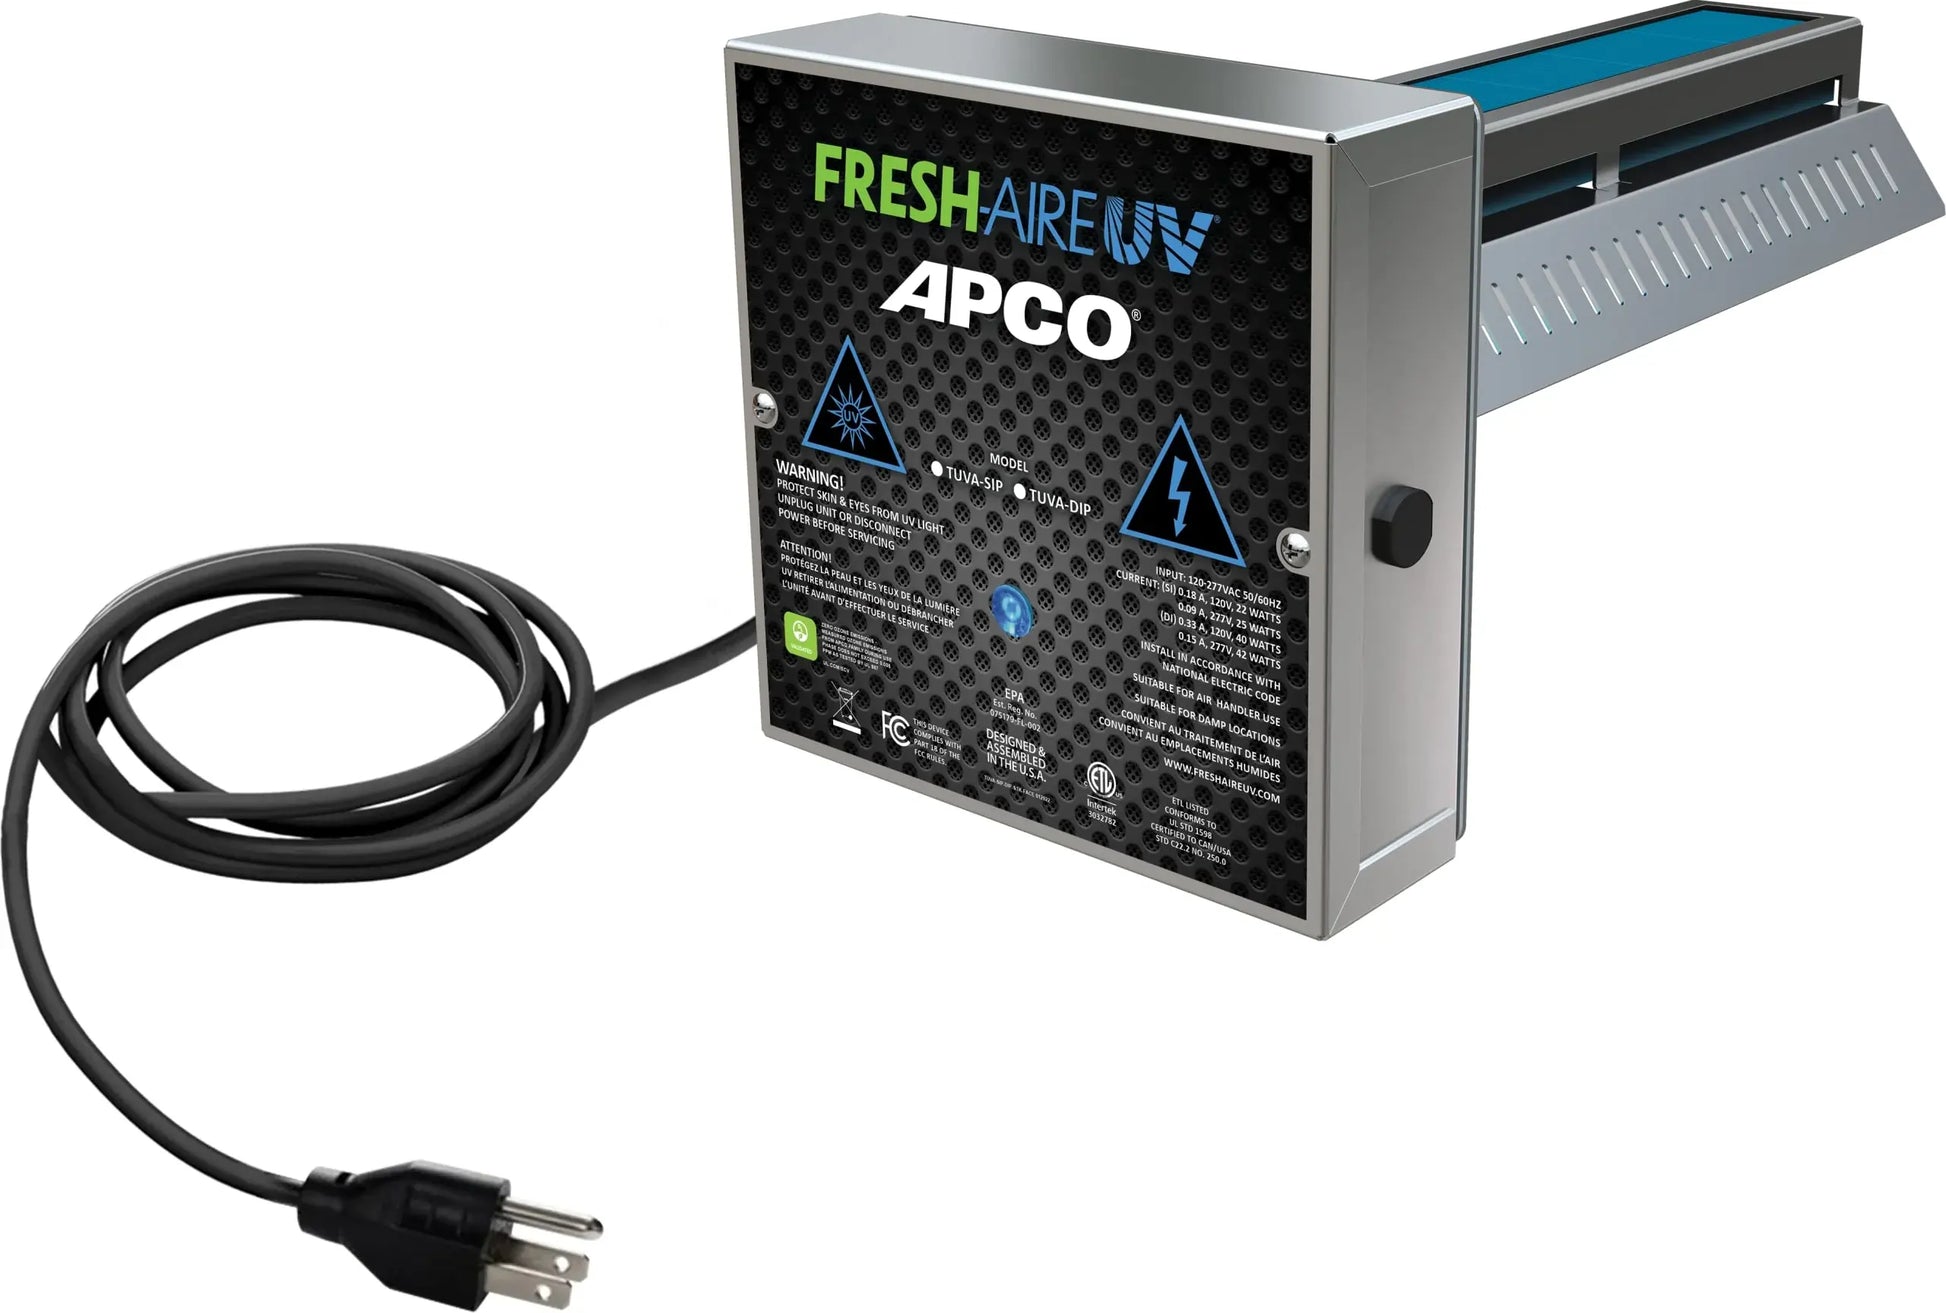 APCO Carbon Cell Matrix HVAC In-Duct UV Light Air Purifier with Wall Plug, Includes 2 Year Lamp, 120-277-Volt